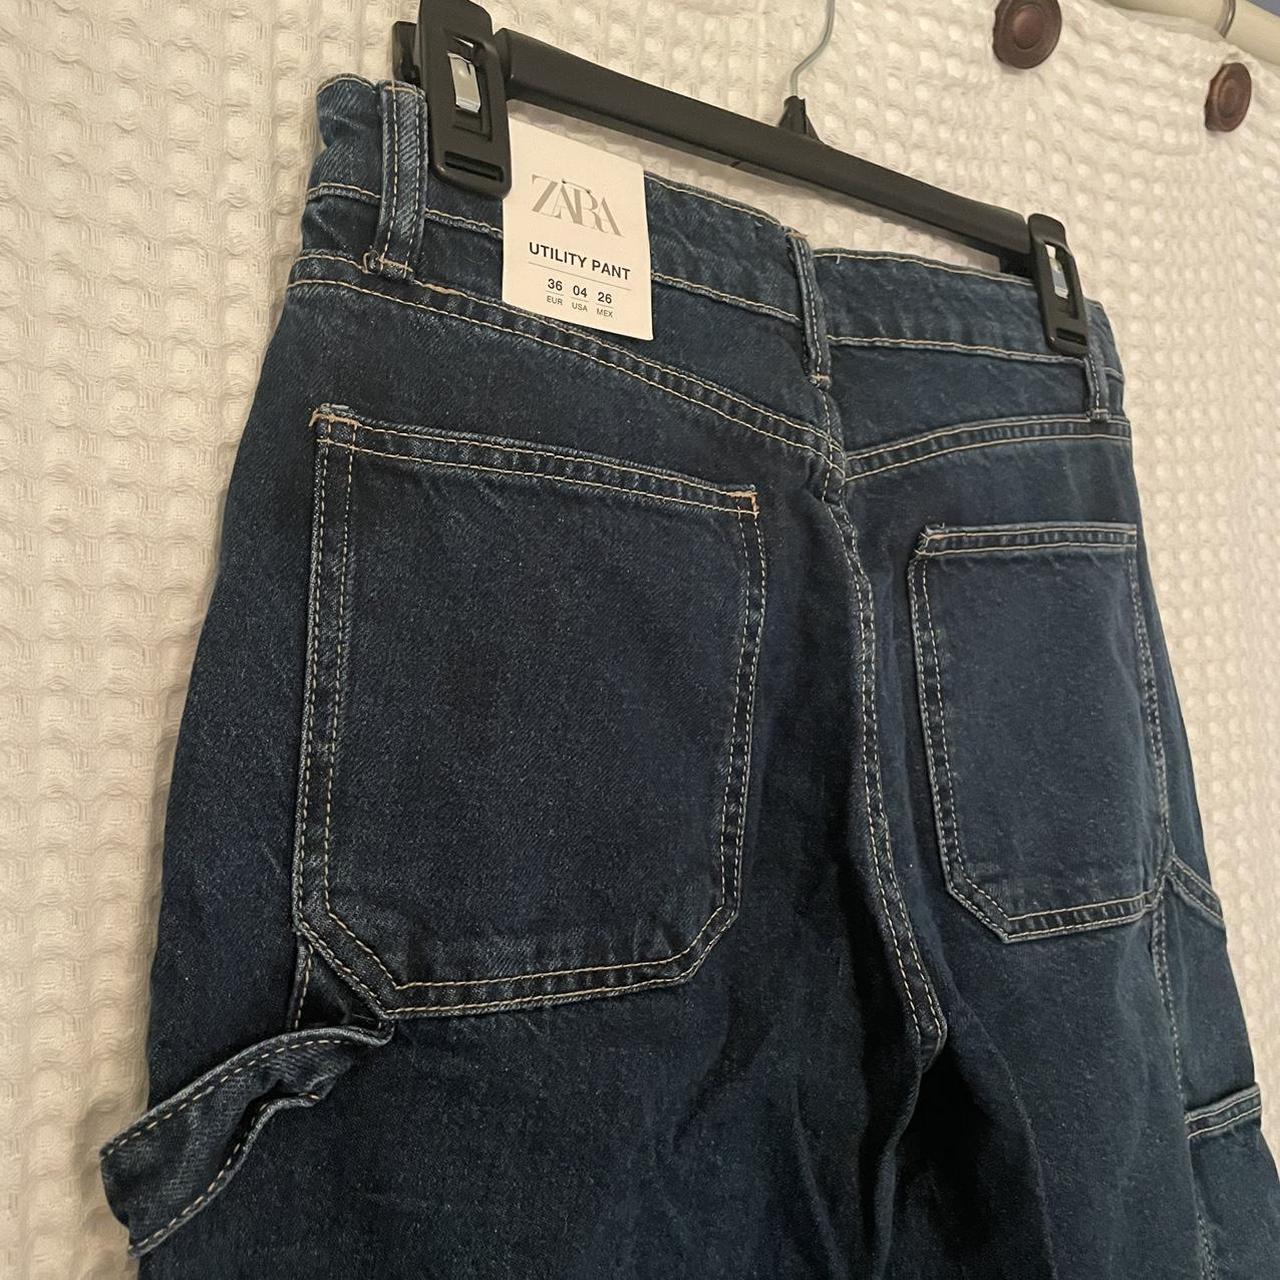 Kmart Denim Cargo Pants - LOVE these jeans. They - Depop